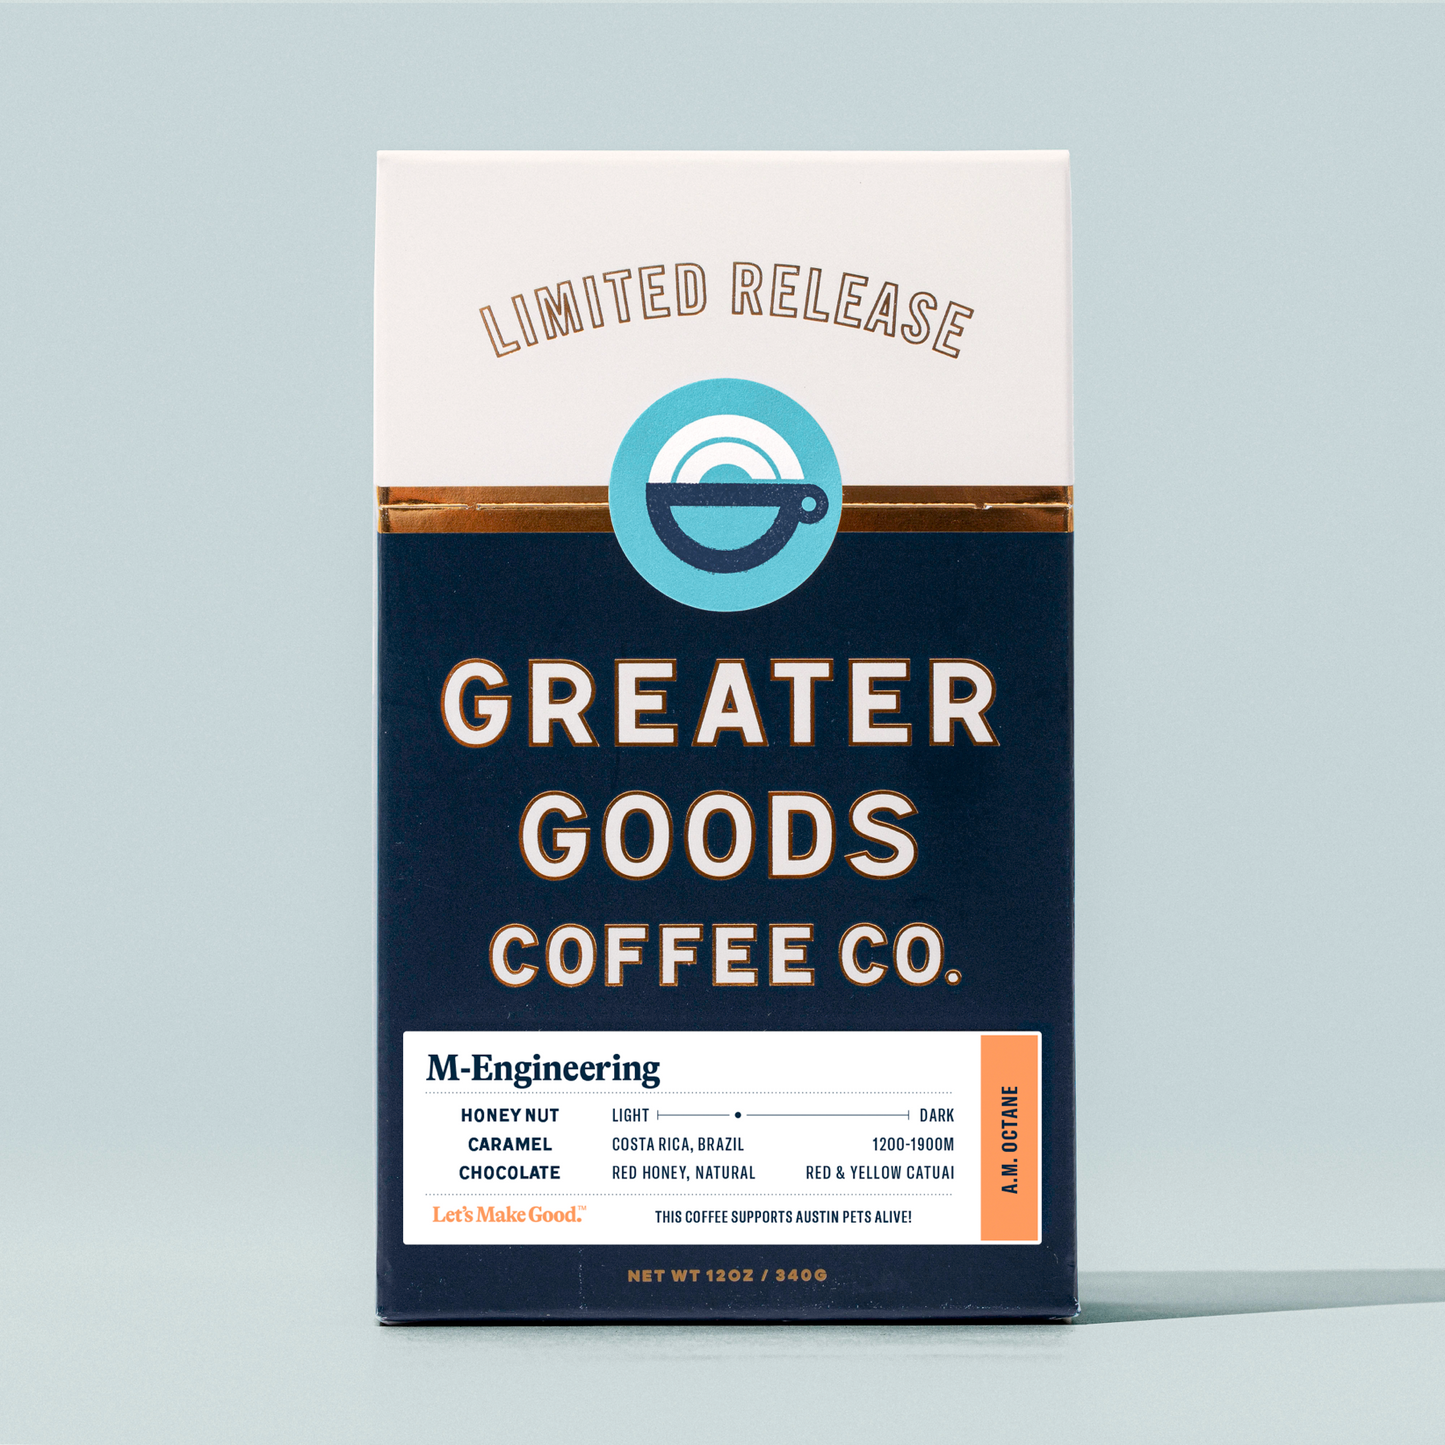 M-Engineering x Greater Goods Coffee Co. "A.M. OCTANE"